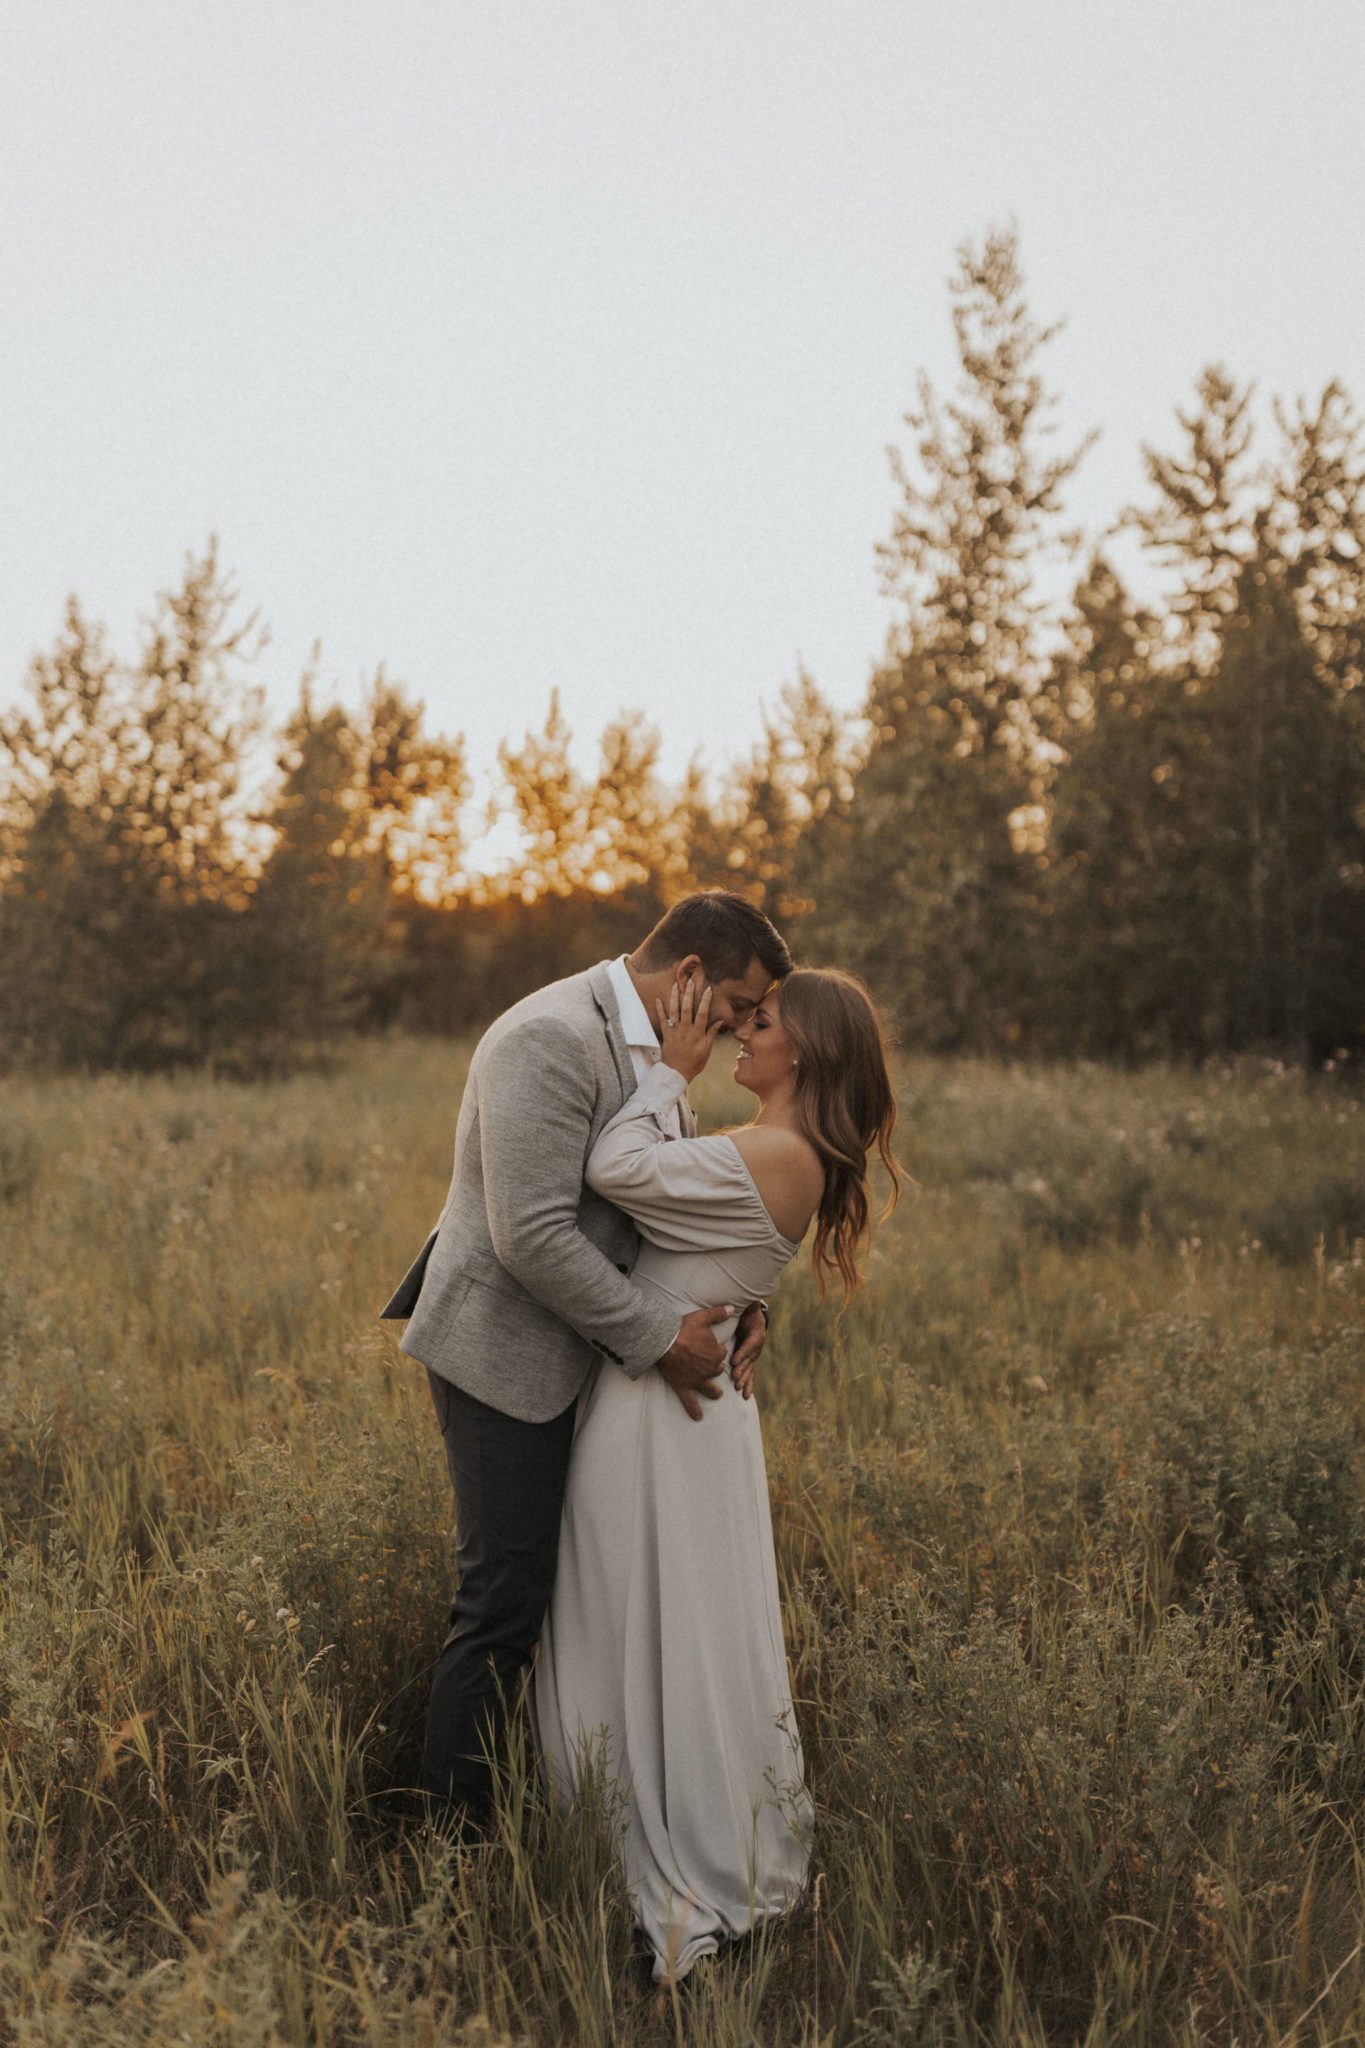 The Dreamiest Sunset Engagement Session Featuring Portraits at Dusk Featured by Brontë Bride